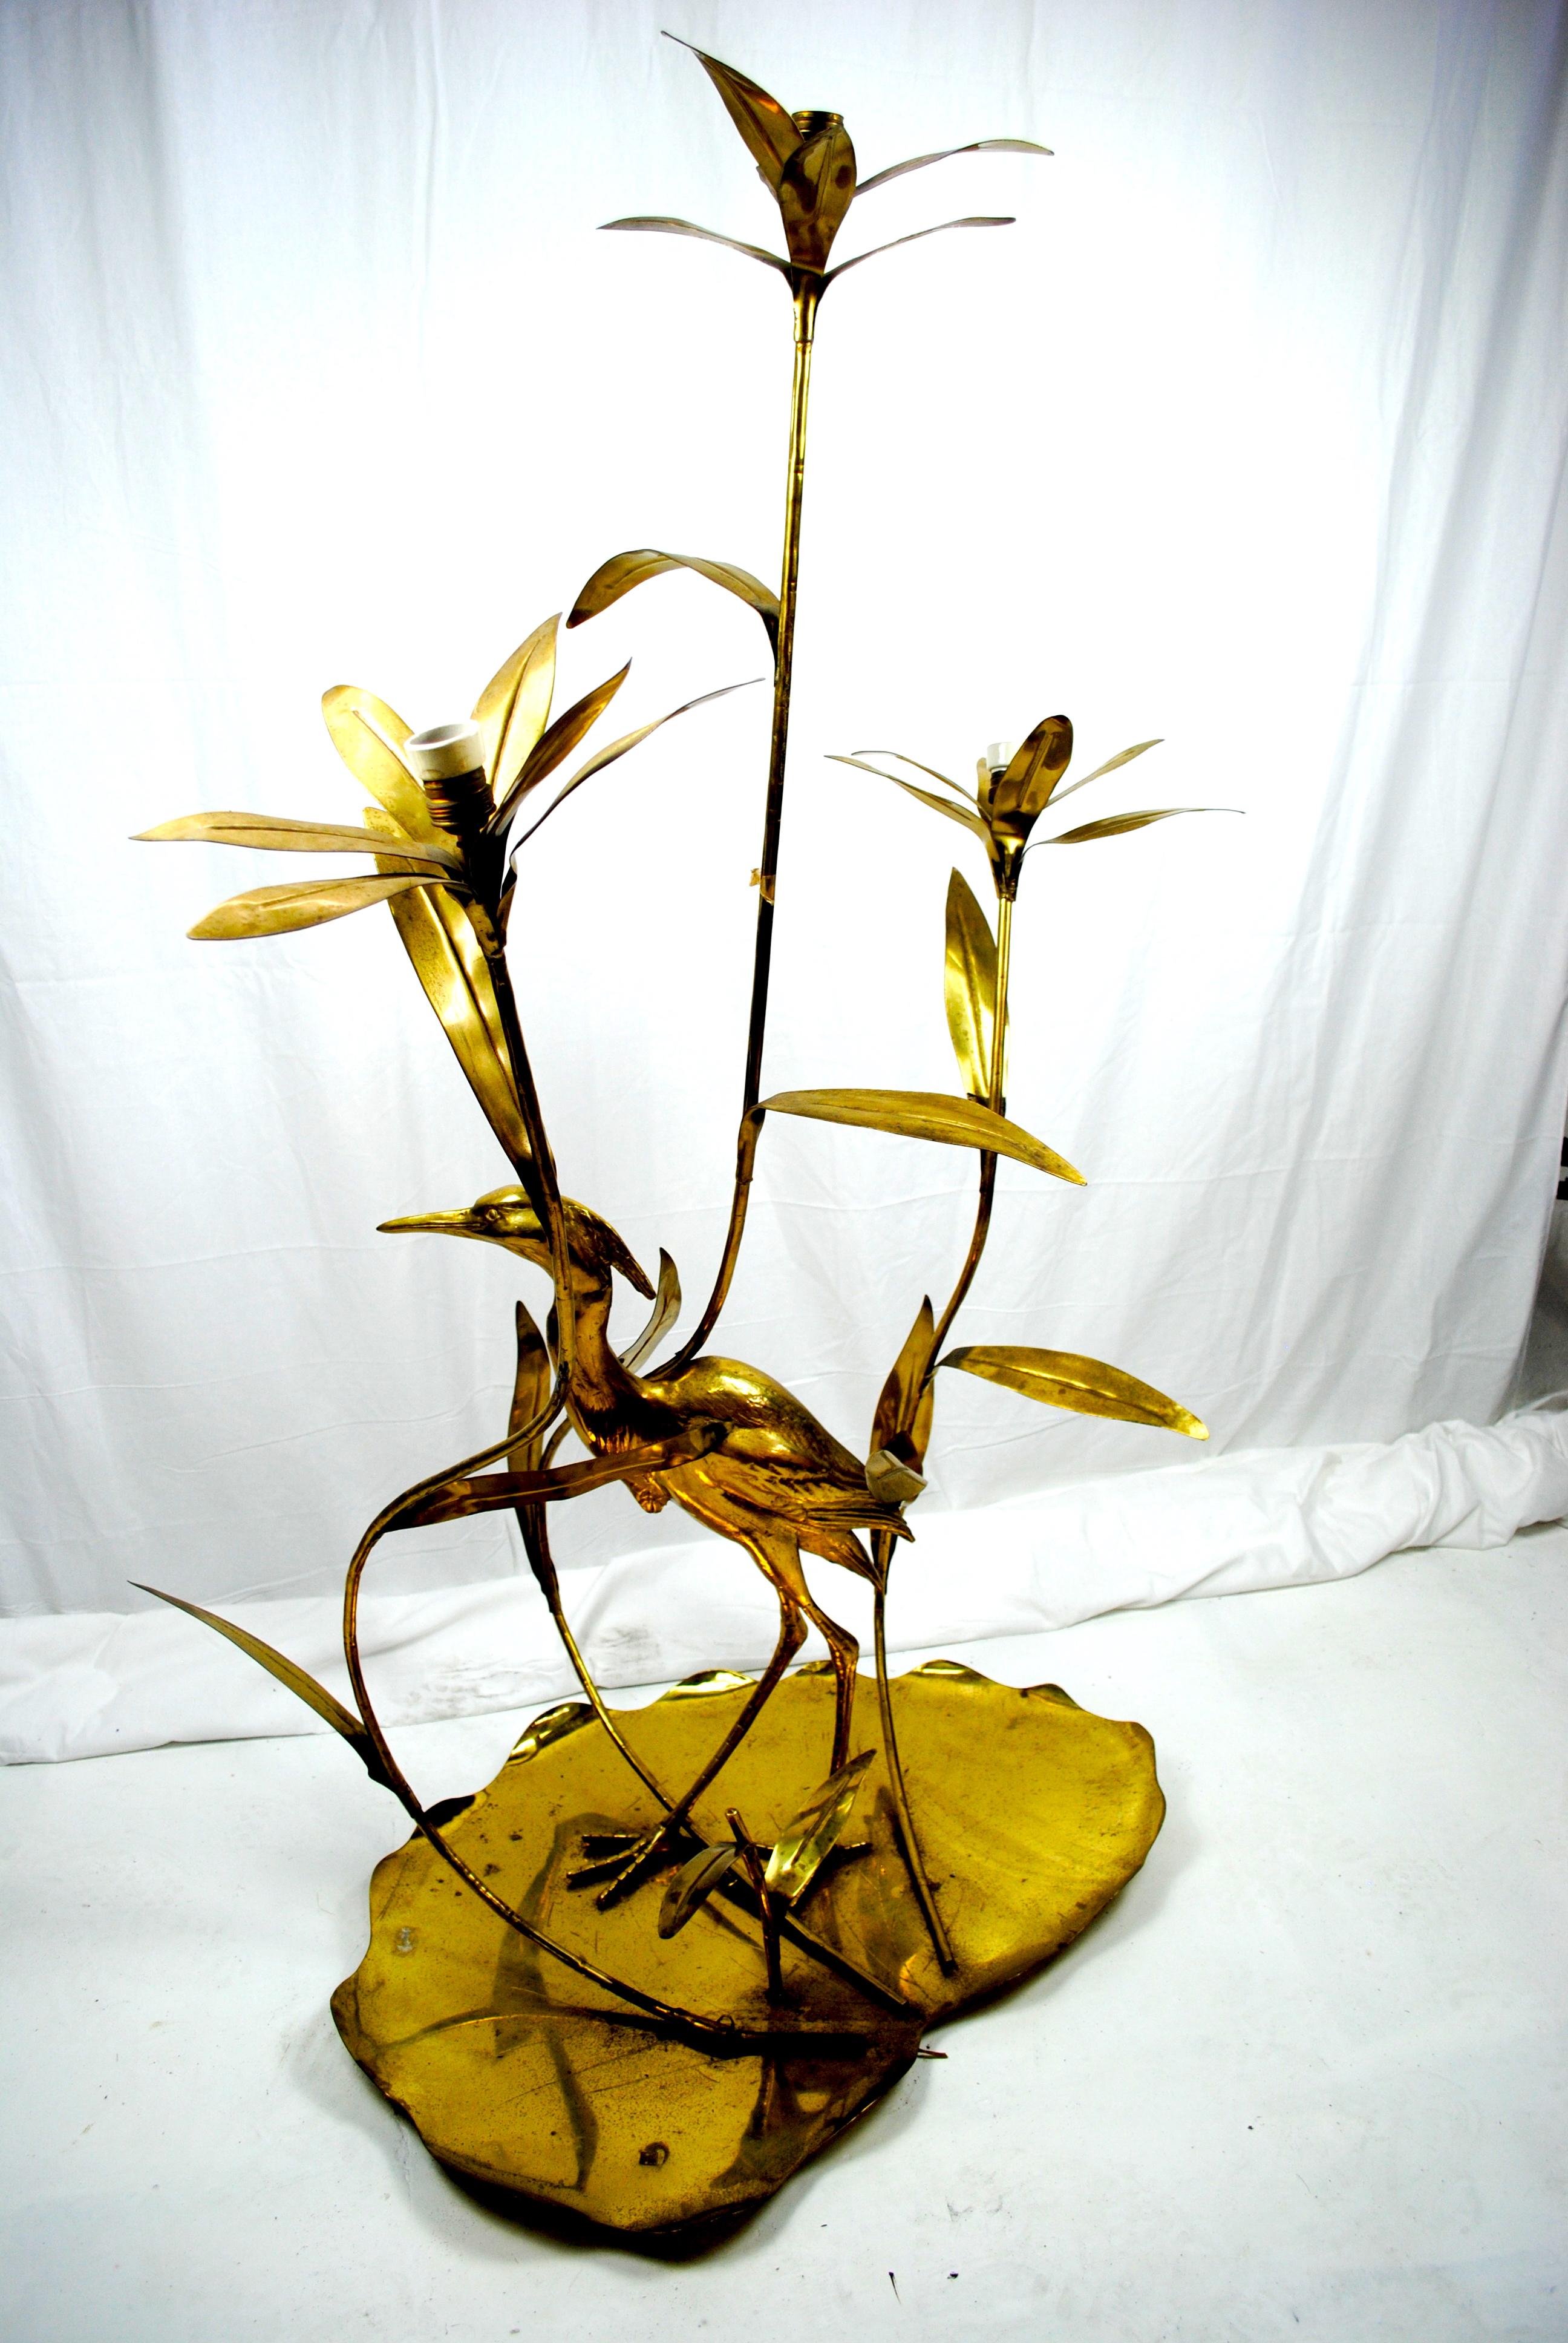 Floor lamp entirely made out of brass designed by Alfredo Freda, an important Italian designer in 1960s. Three lights. This lamp represent a crane /heron between the stalks of the lotus or lily flowers. The mark of the production company is